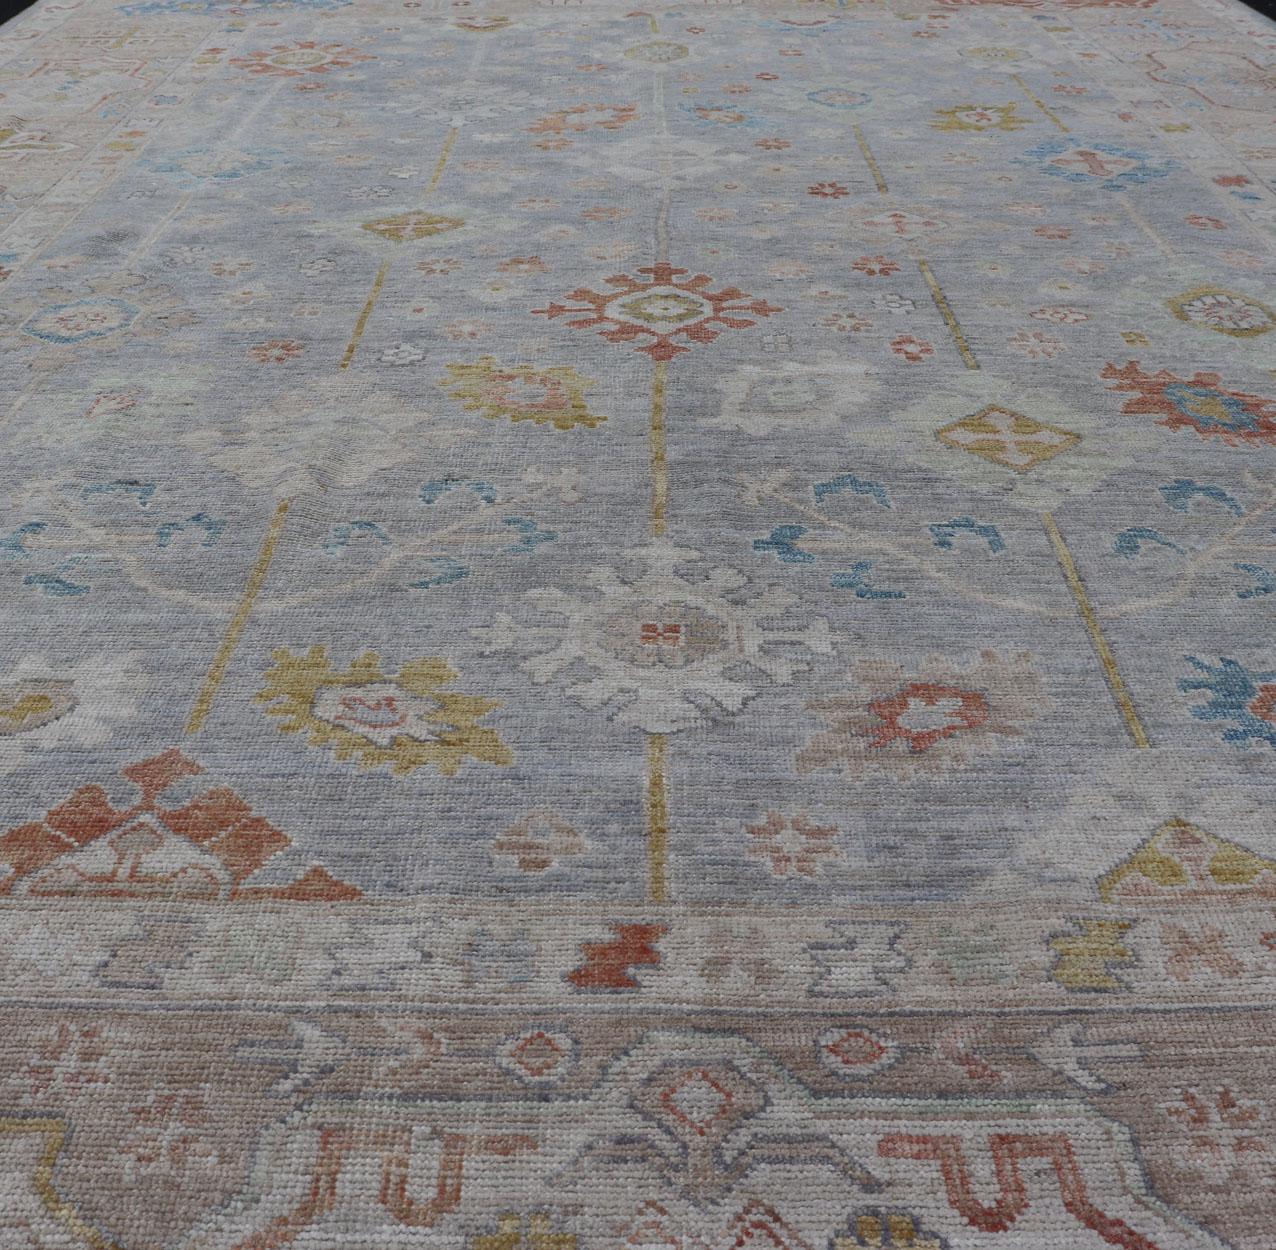 Modern Oushak Rug Hand Knotted on a Light Gray Field and Rusty Orange 2